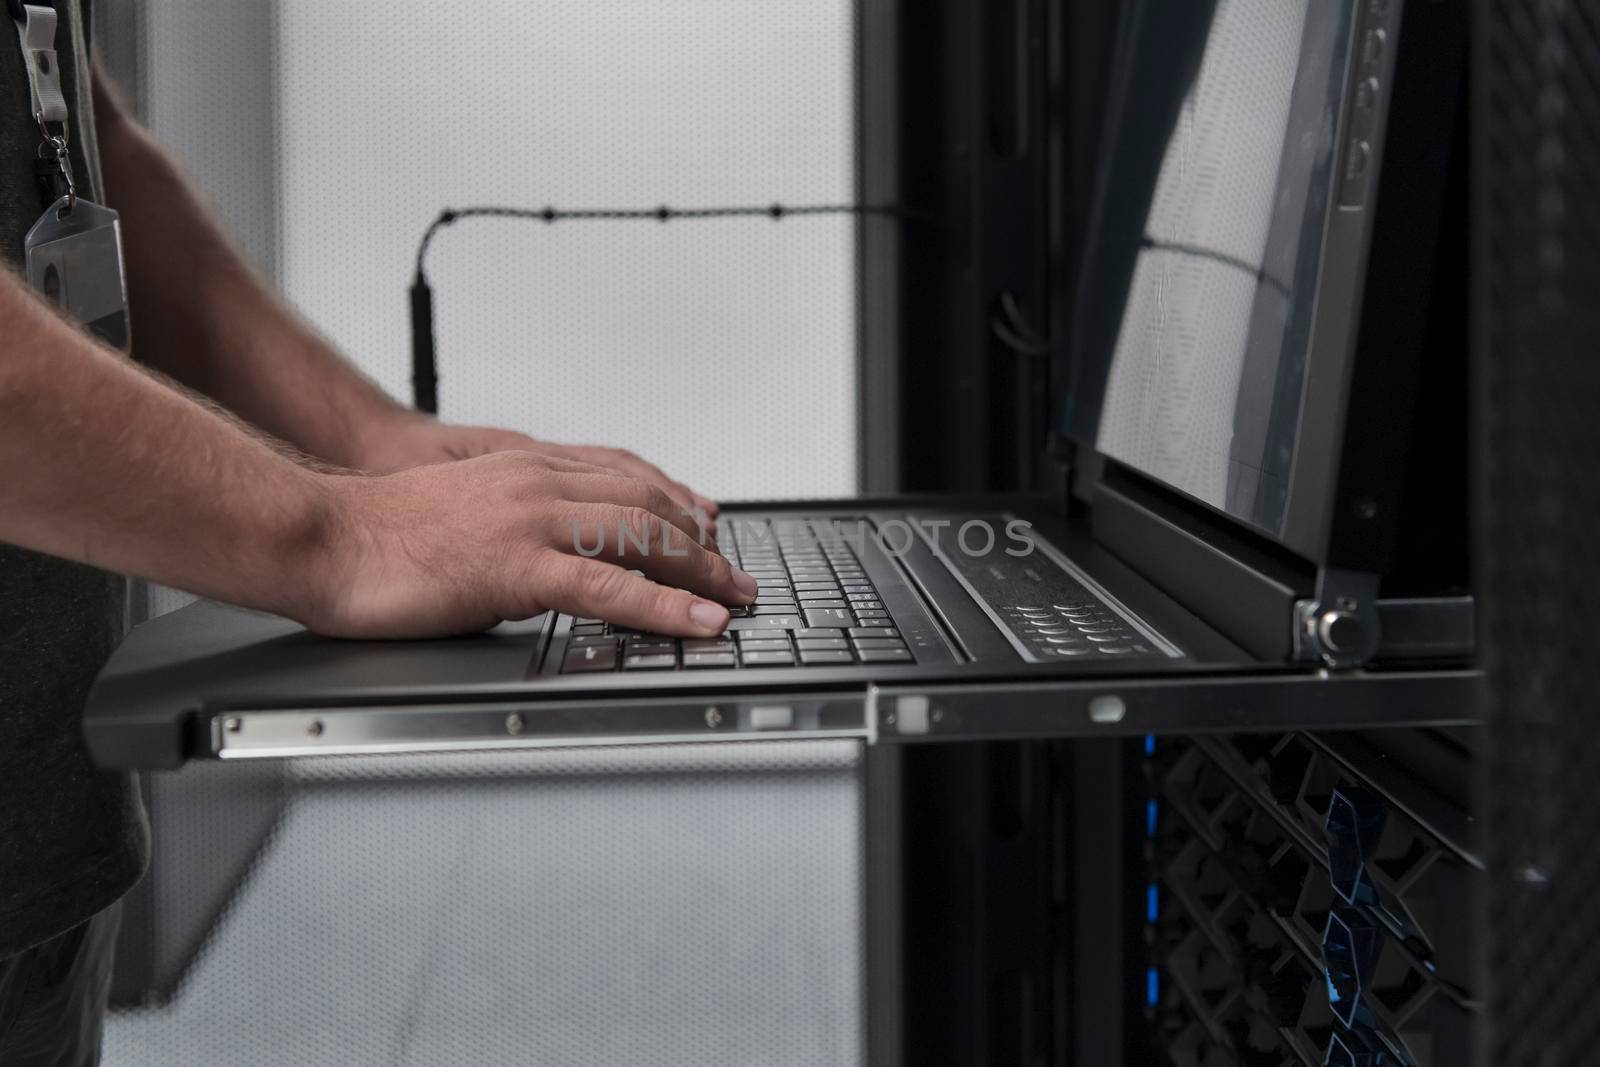 Close up on Data Center Engineer hands Using keyboard on a supercomputer. Server Room Specialist Facility with Male System Administrator Working with Data Protection Network for Cyber Security.